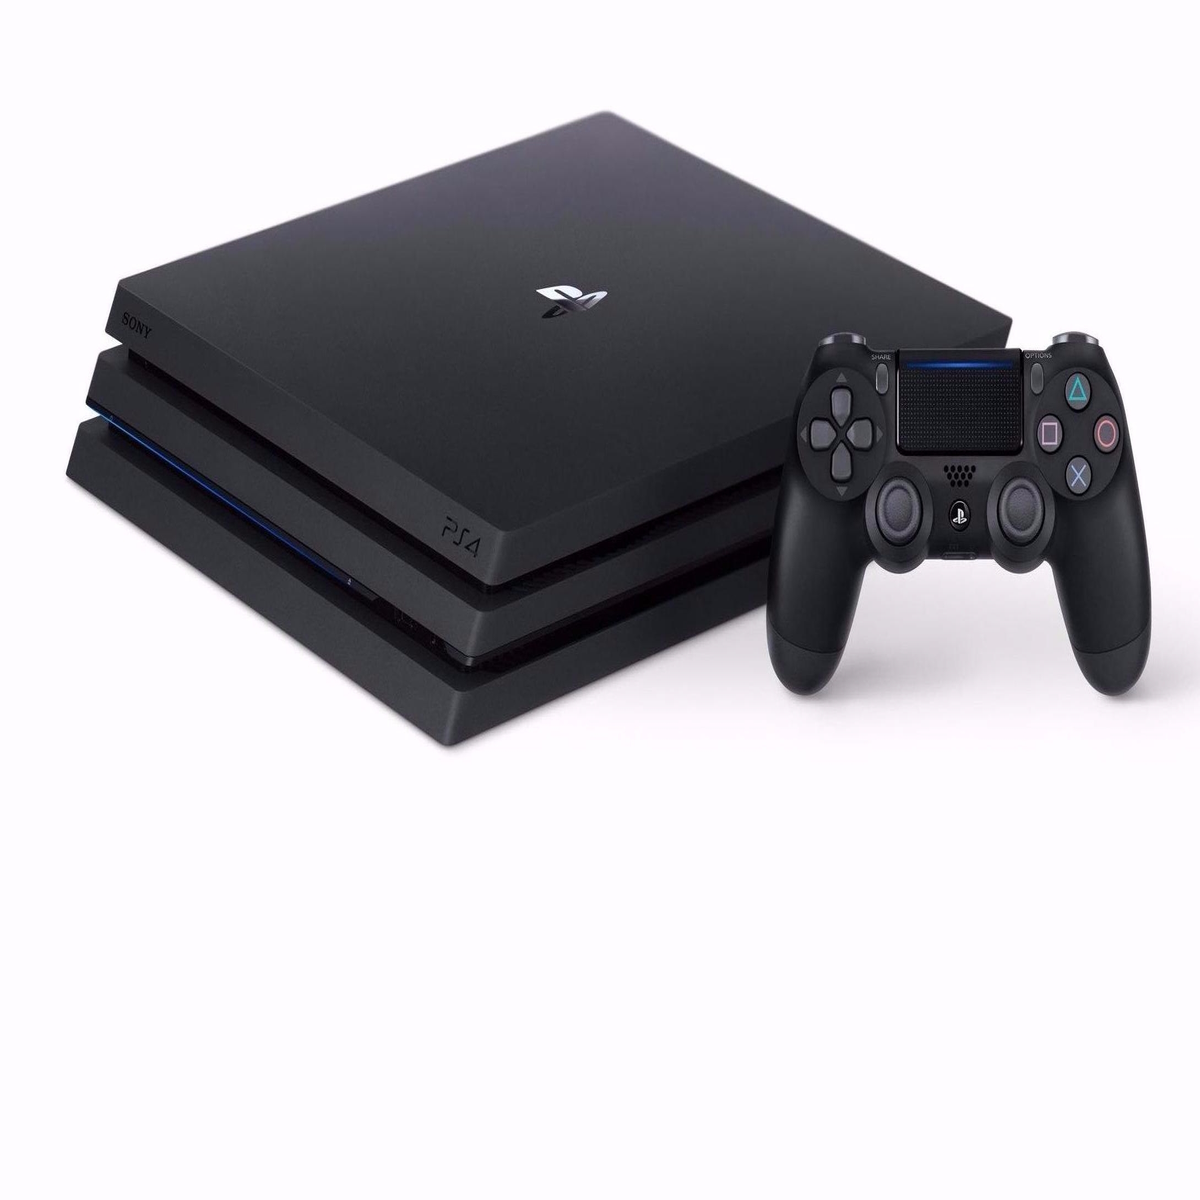 PlayStation 4 Pro Review: Is This “4K” Machine Worth An Upgrade